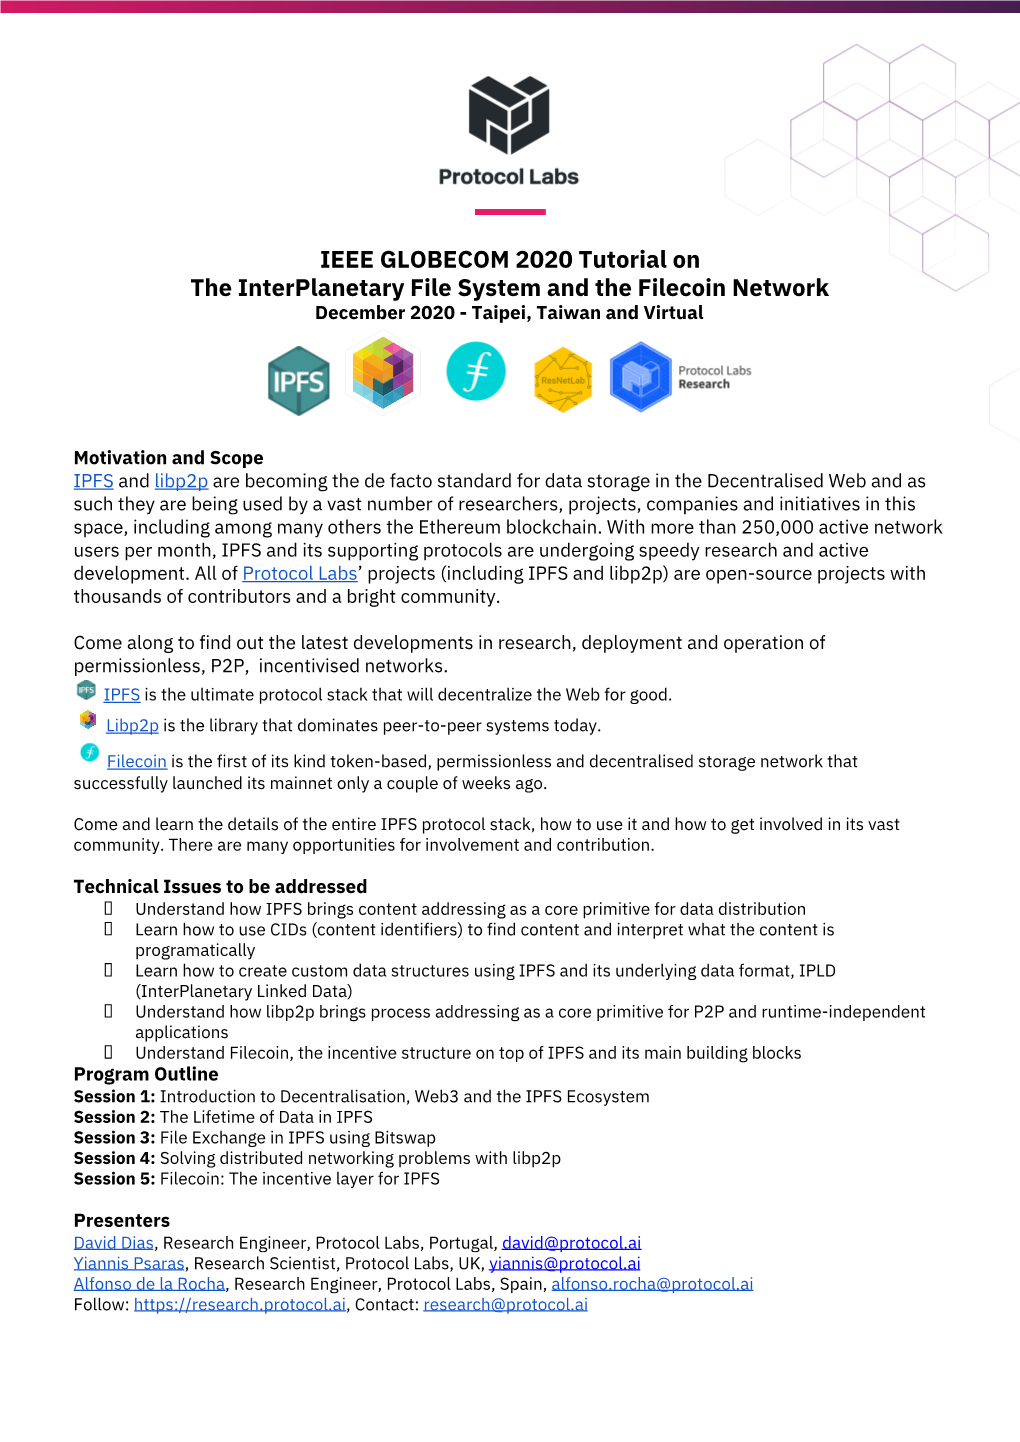 IEEE GLOBECOM 2020 Tutorial on the Interplanetary File System and the Filecoin Network December 2020 - Taipei, Taiwan and Virtual